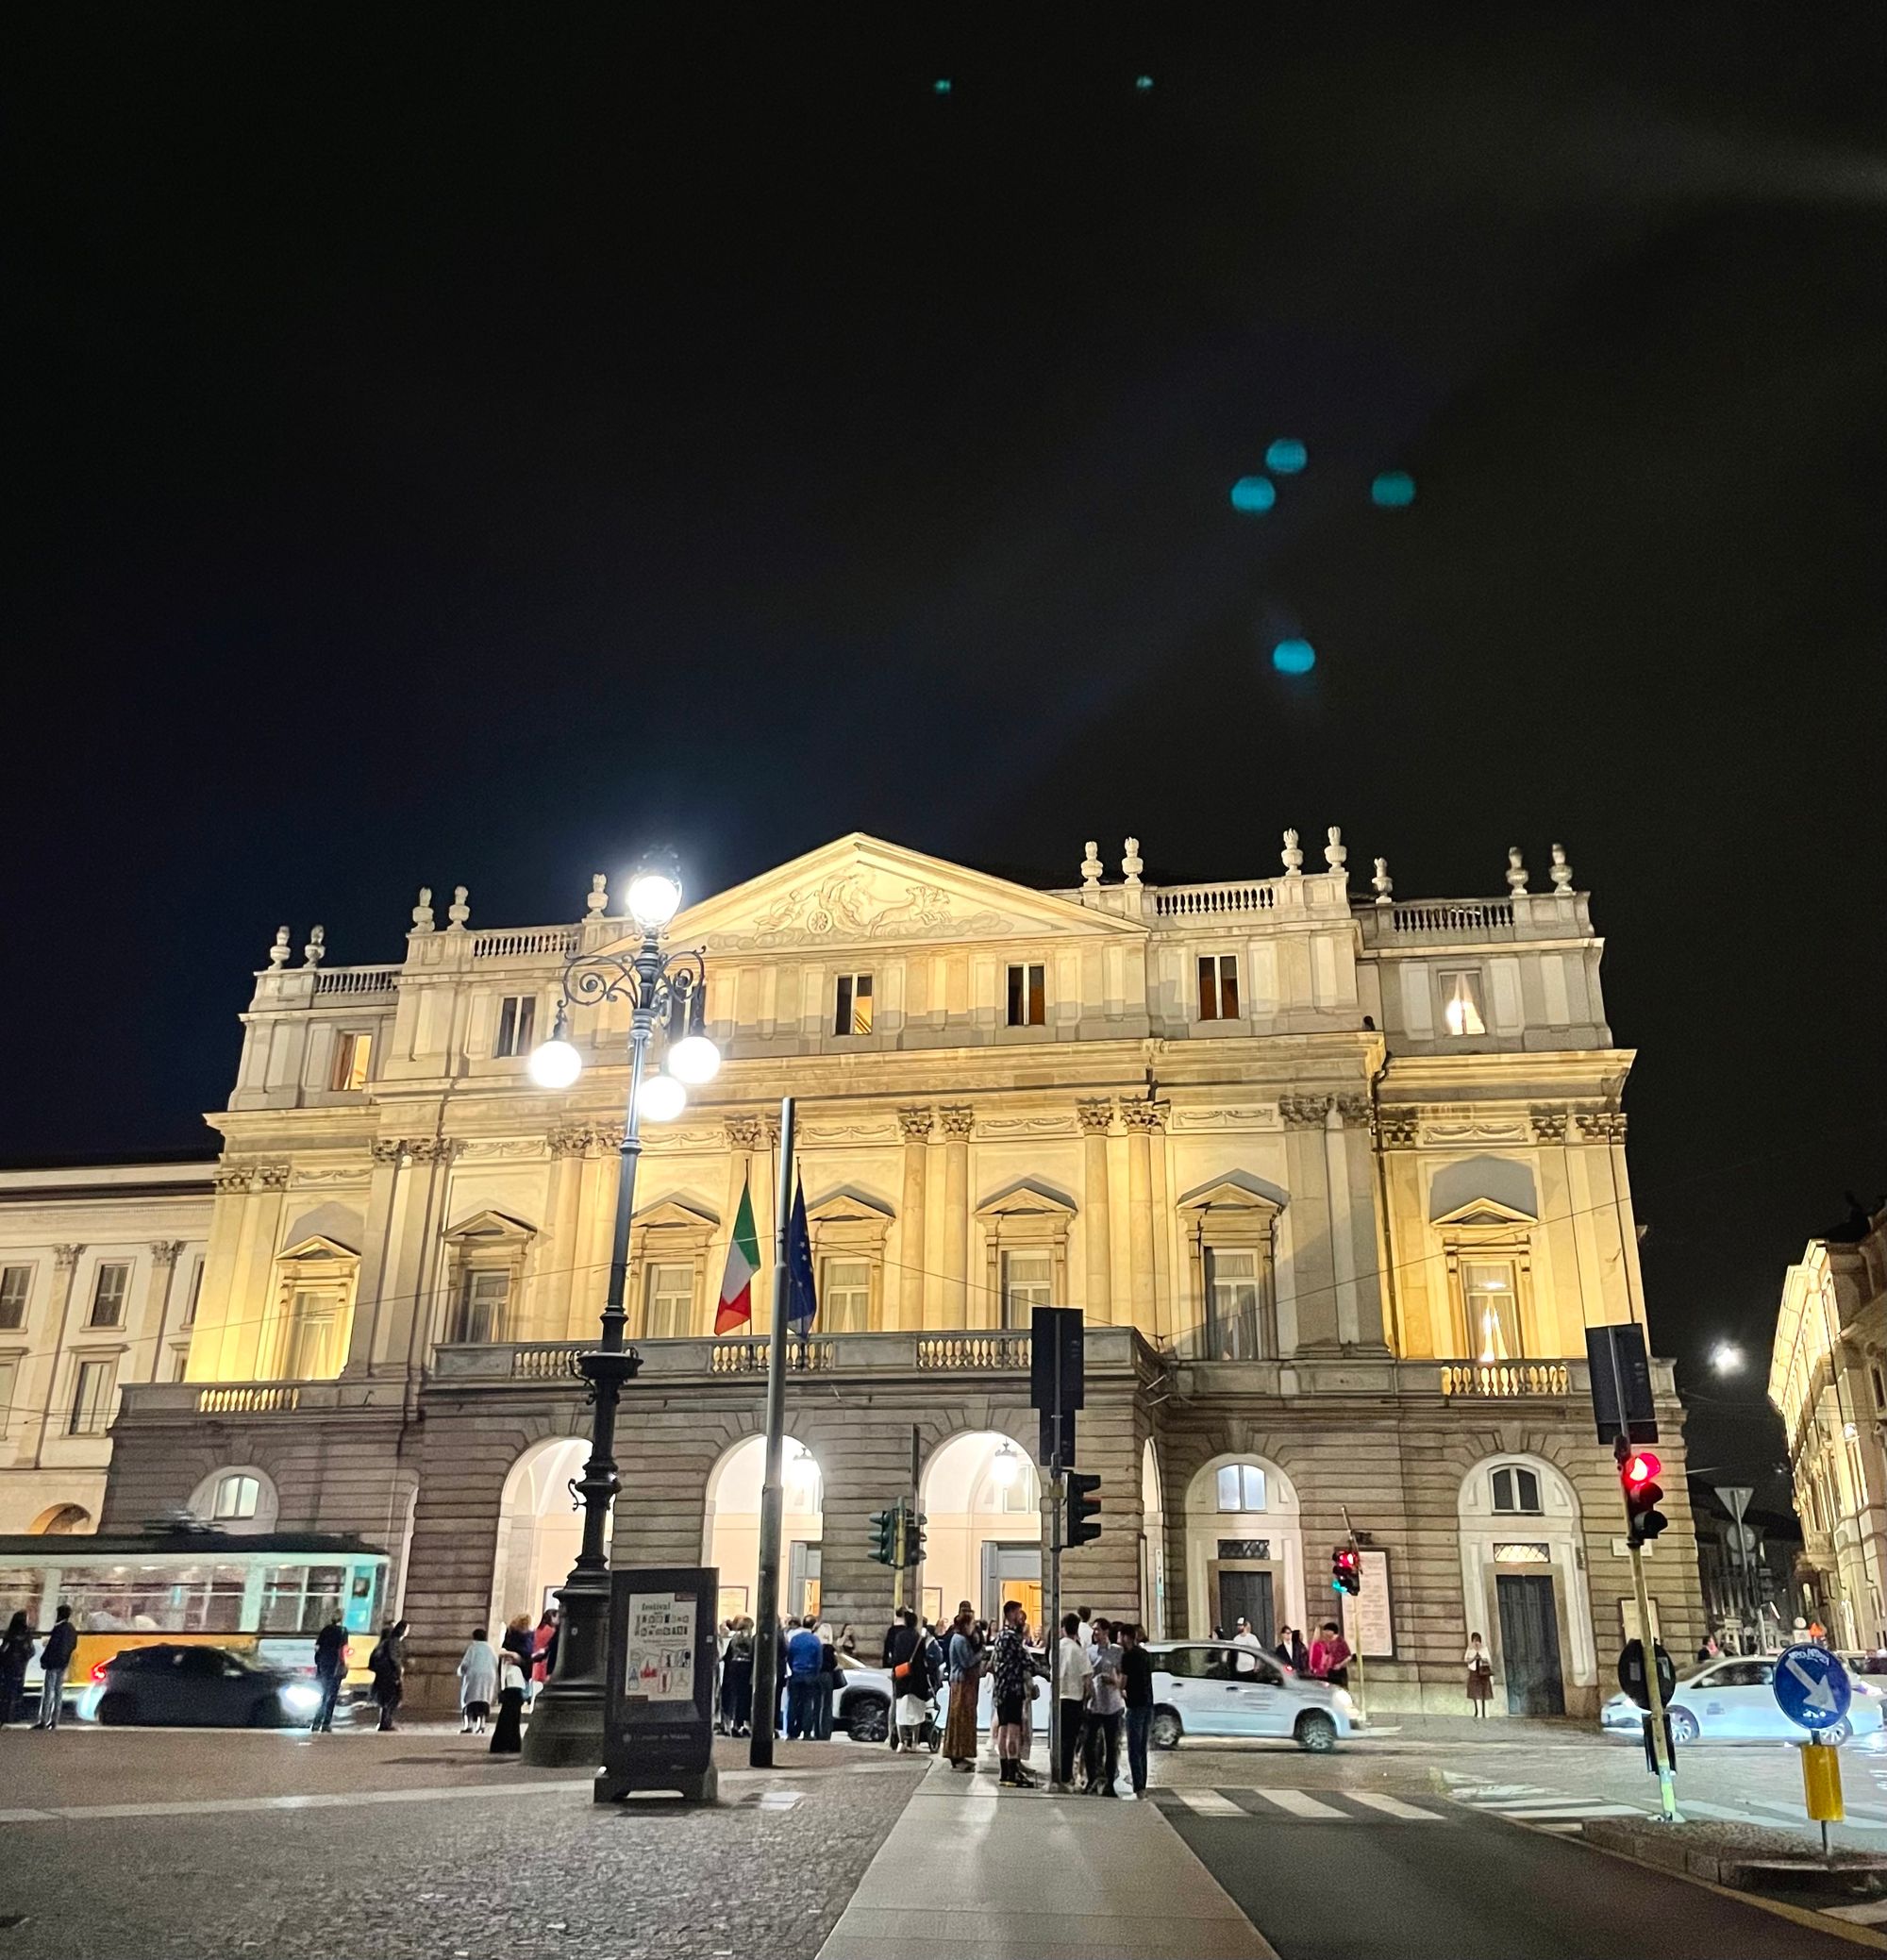 The well-lit façade of la Scala opera house after the opera at night